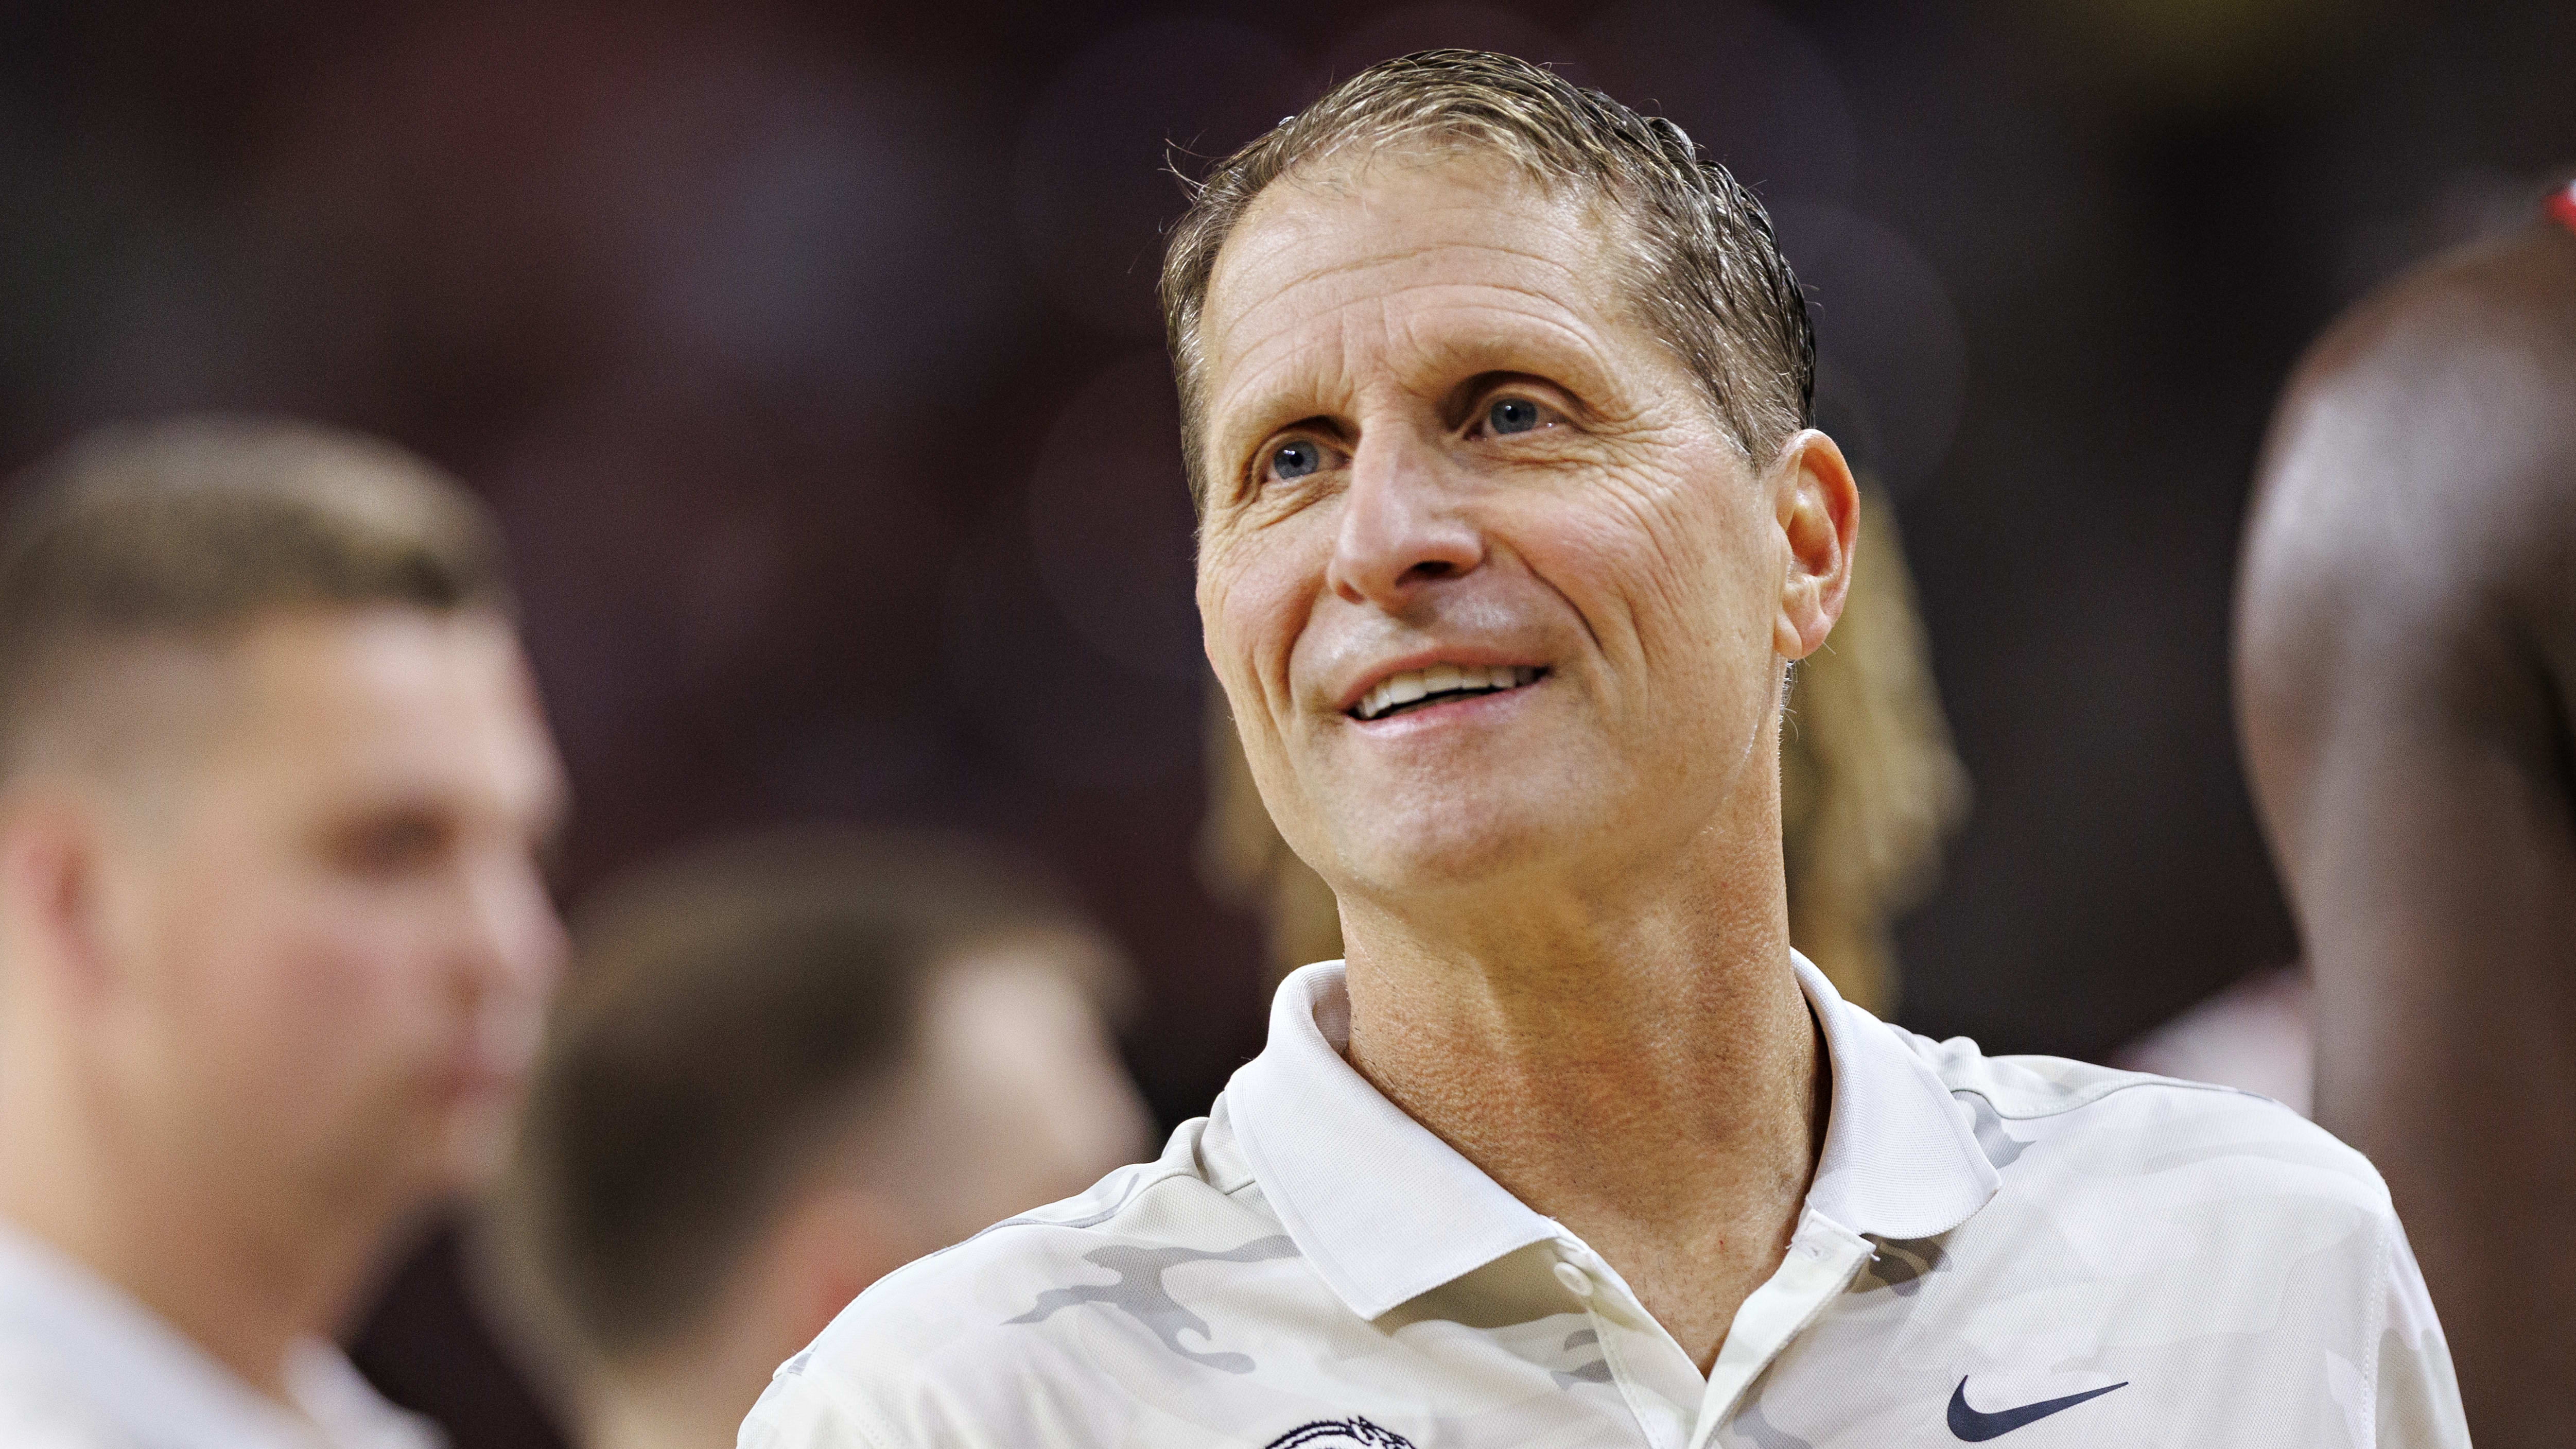 Eric Musselman smiles during a timeout.